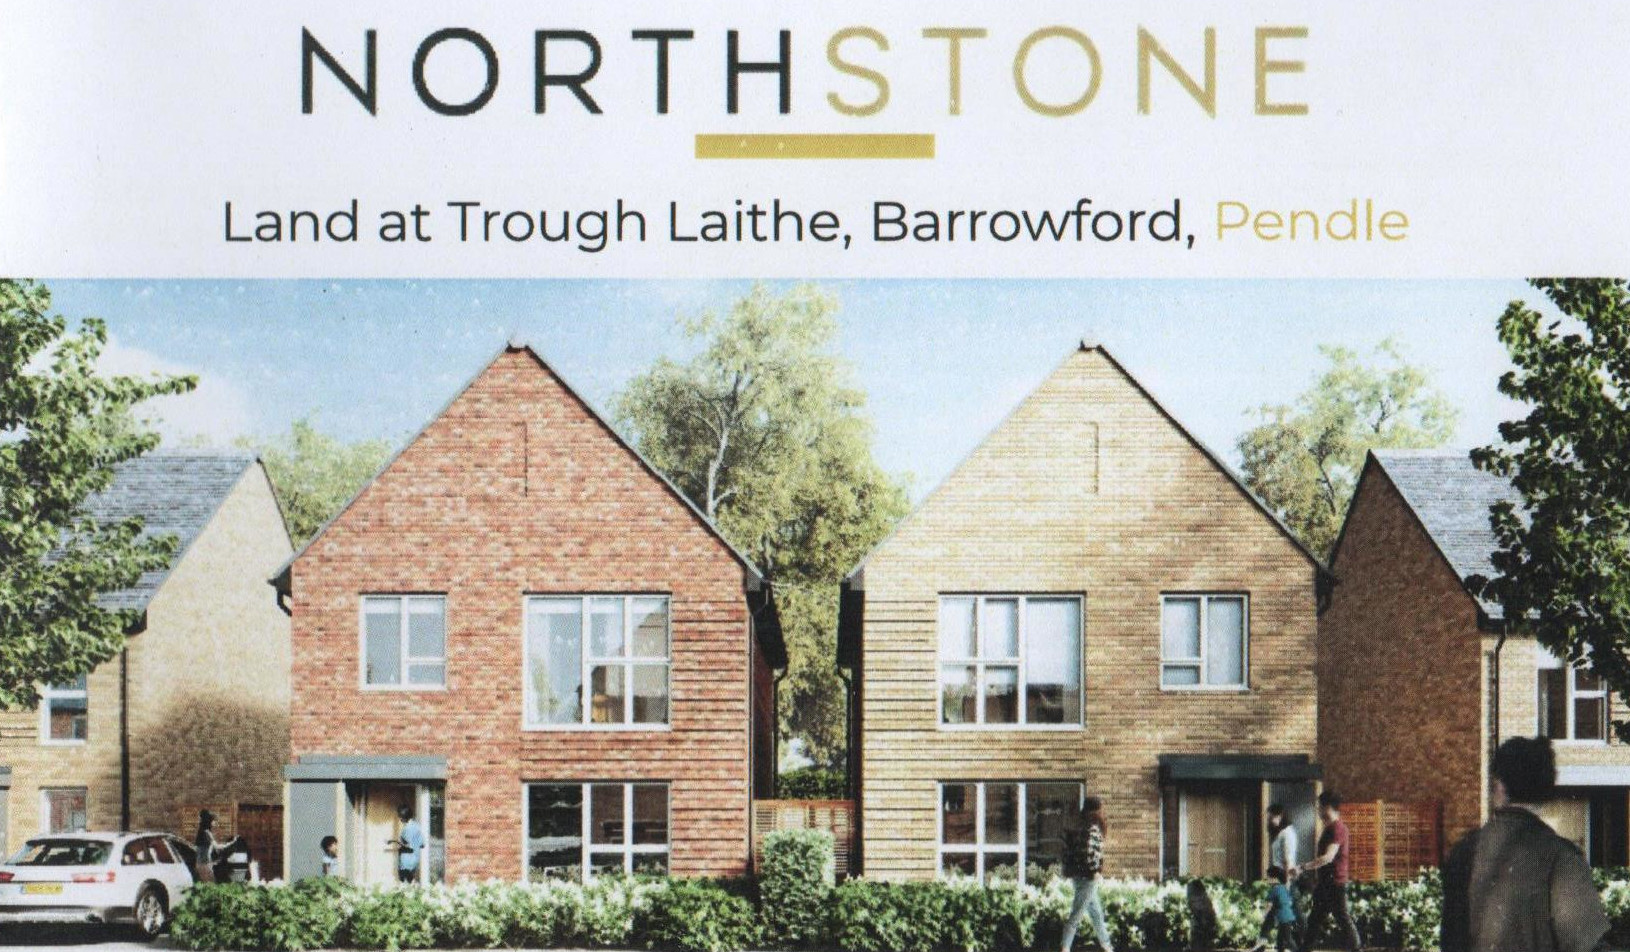 Image of North Stone houses proposed for Trough Laithe, Barrowford